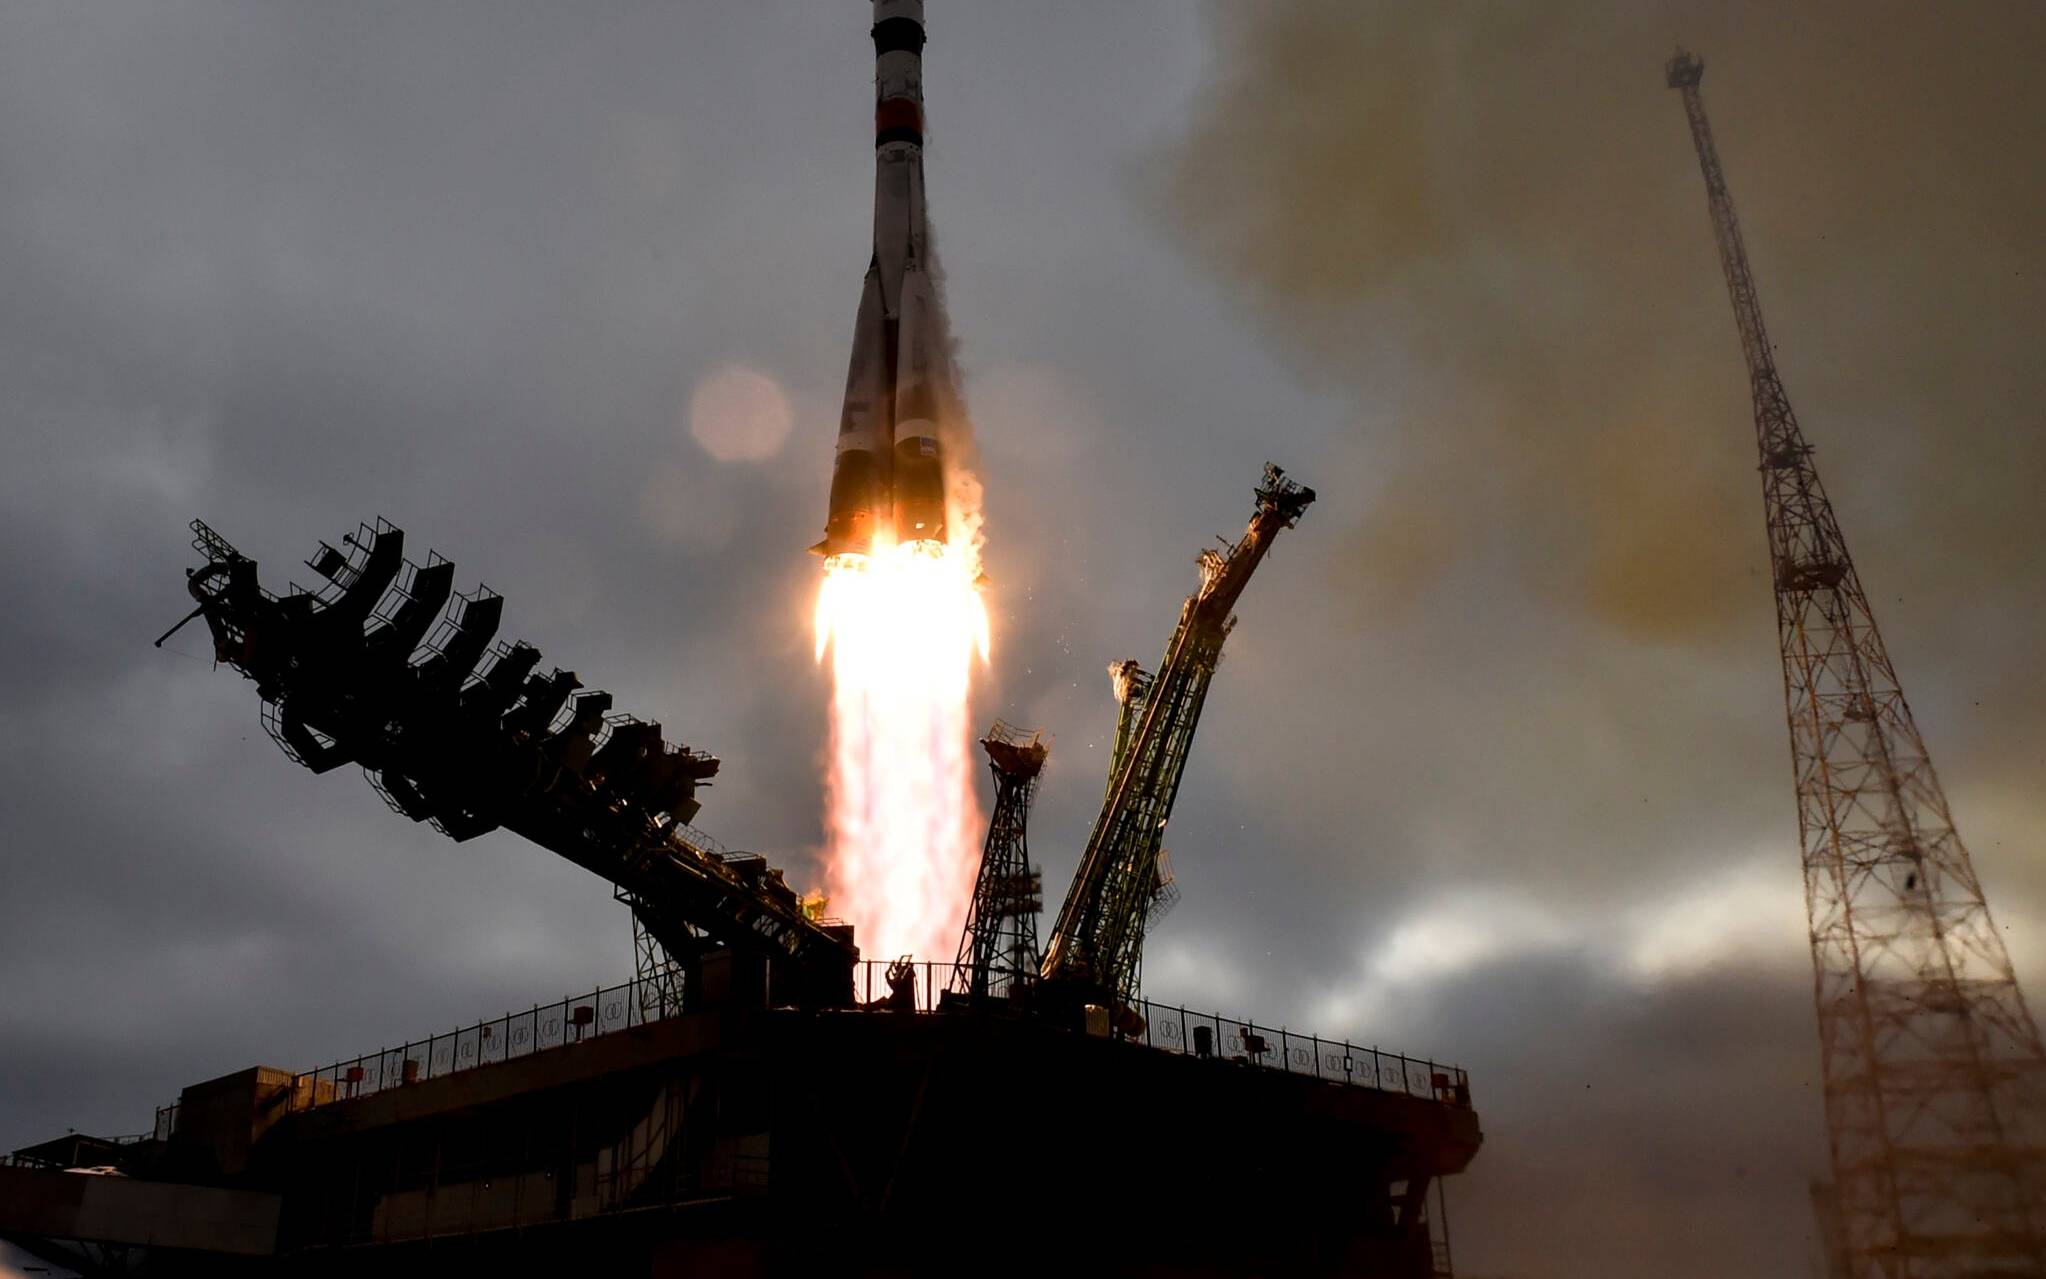 The Soyuz MS-20 spacecraft carrying the crew of Russian cosmonaut Alexander Misurkin, Japanese billionaire Yusaku Maezawa and his production assistant Yozo Hirano blasts off to the International Space Station (ISS) from the Moscow-leased Baikonur cosmodrome in Kazakhstan on December 8, 2021. (Photo by Kirill KUDRYAVTSEV / AFP)